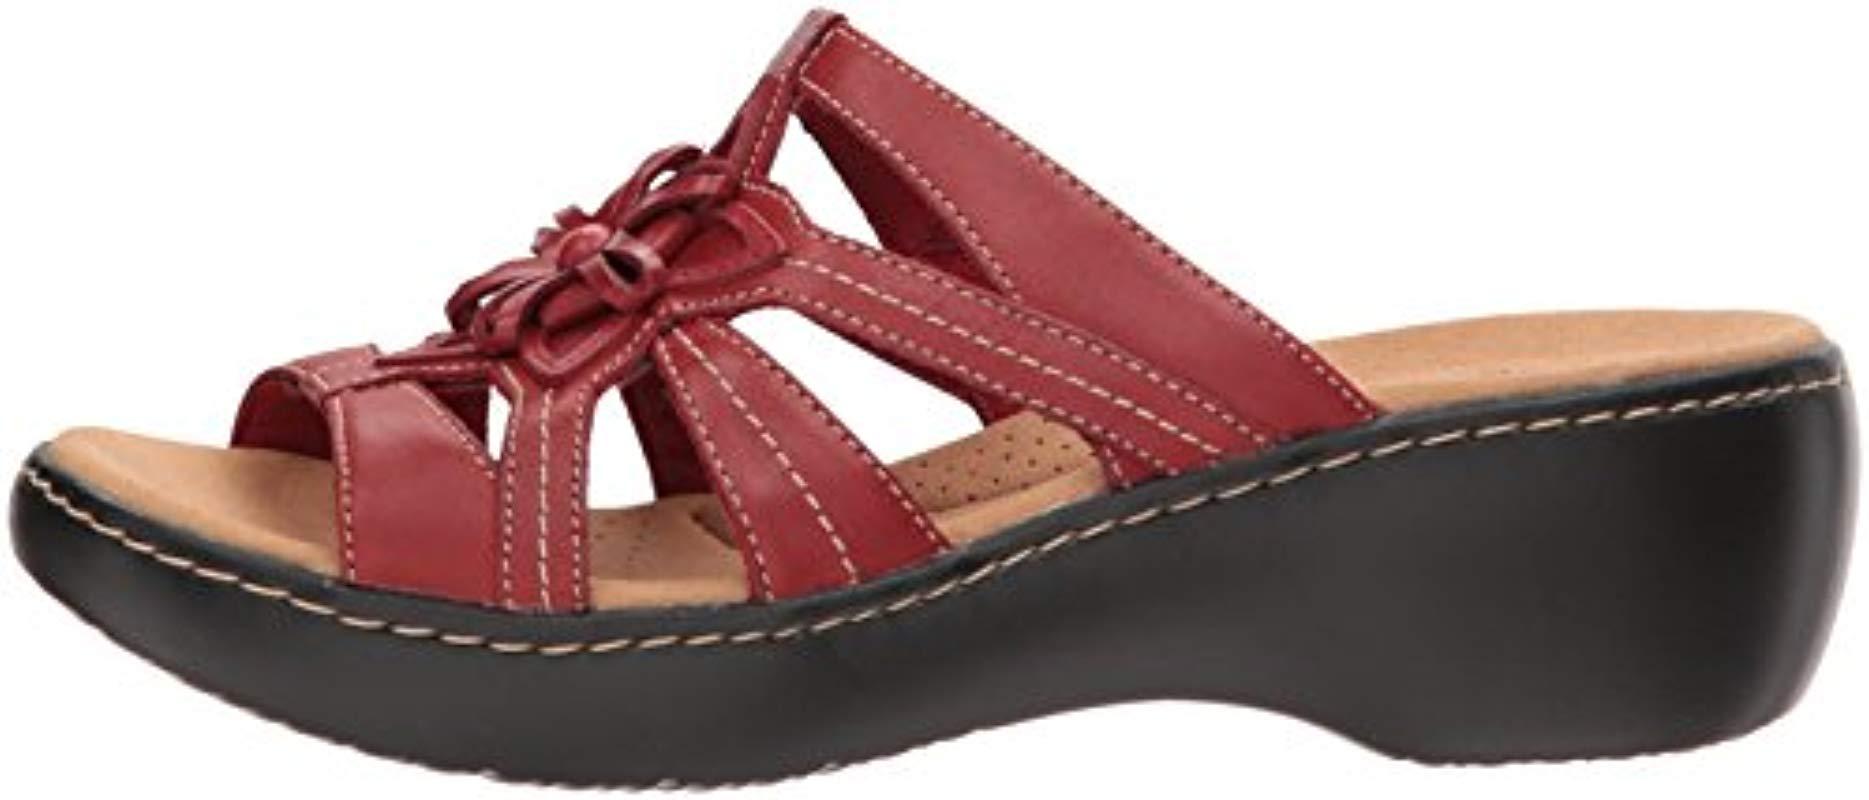 clarks red leather sandals